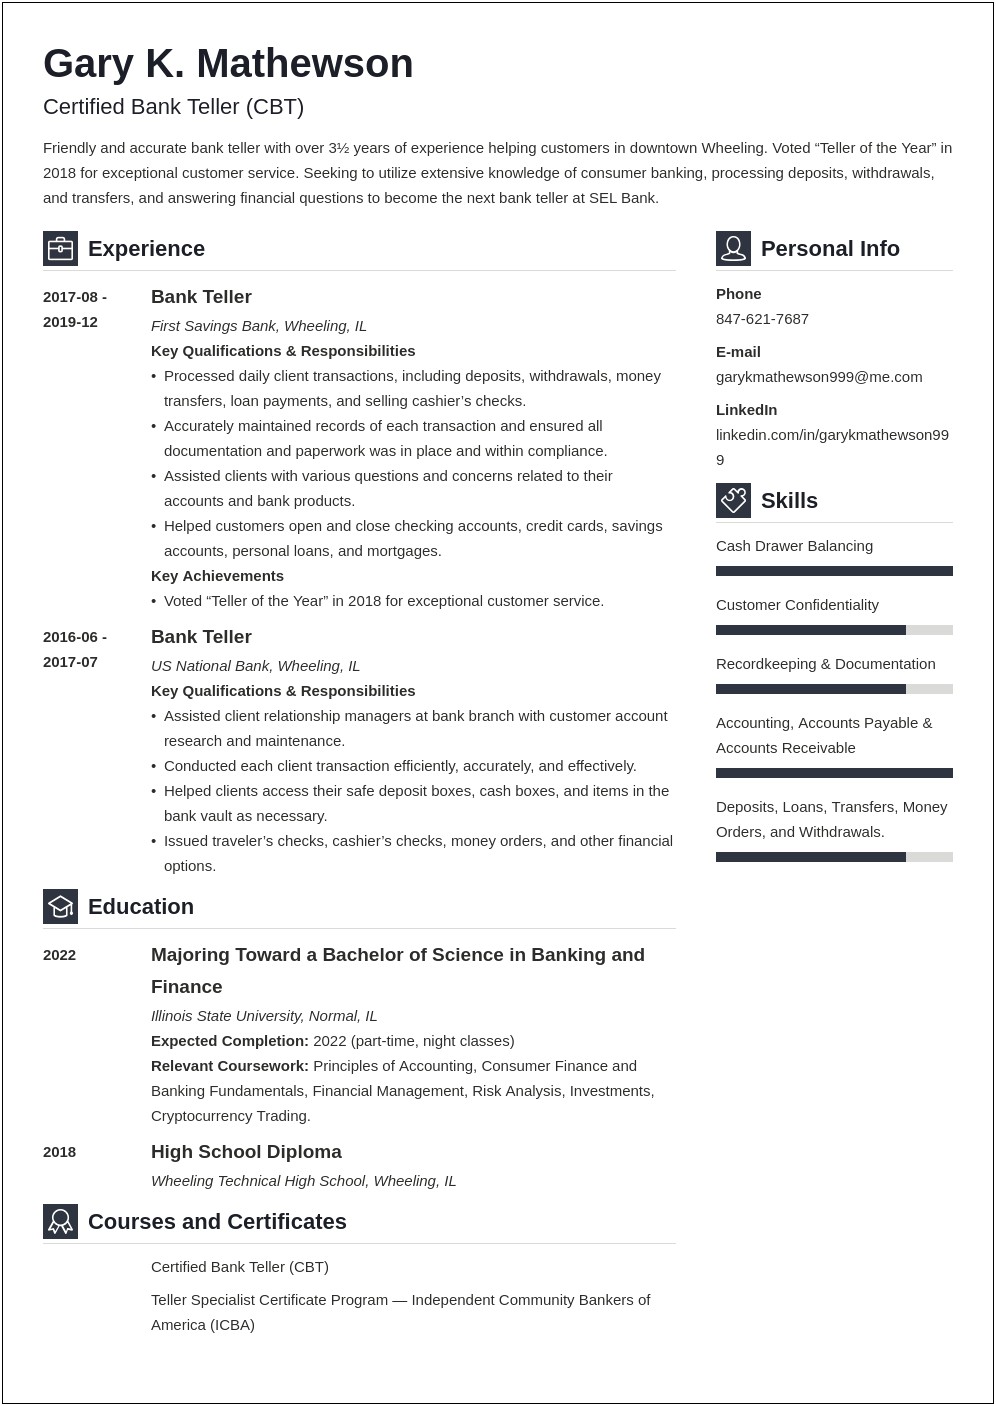 Experienced Bank Teller Resume Objective